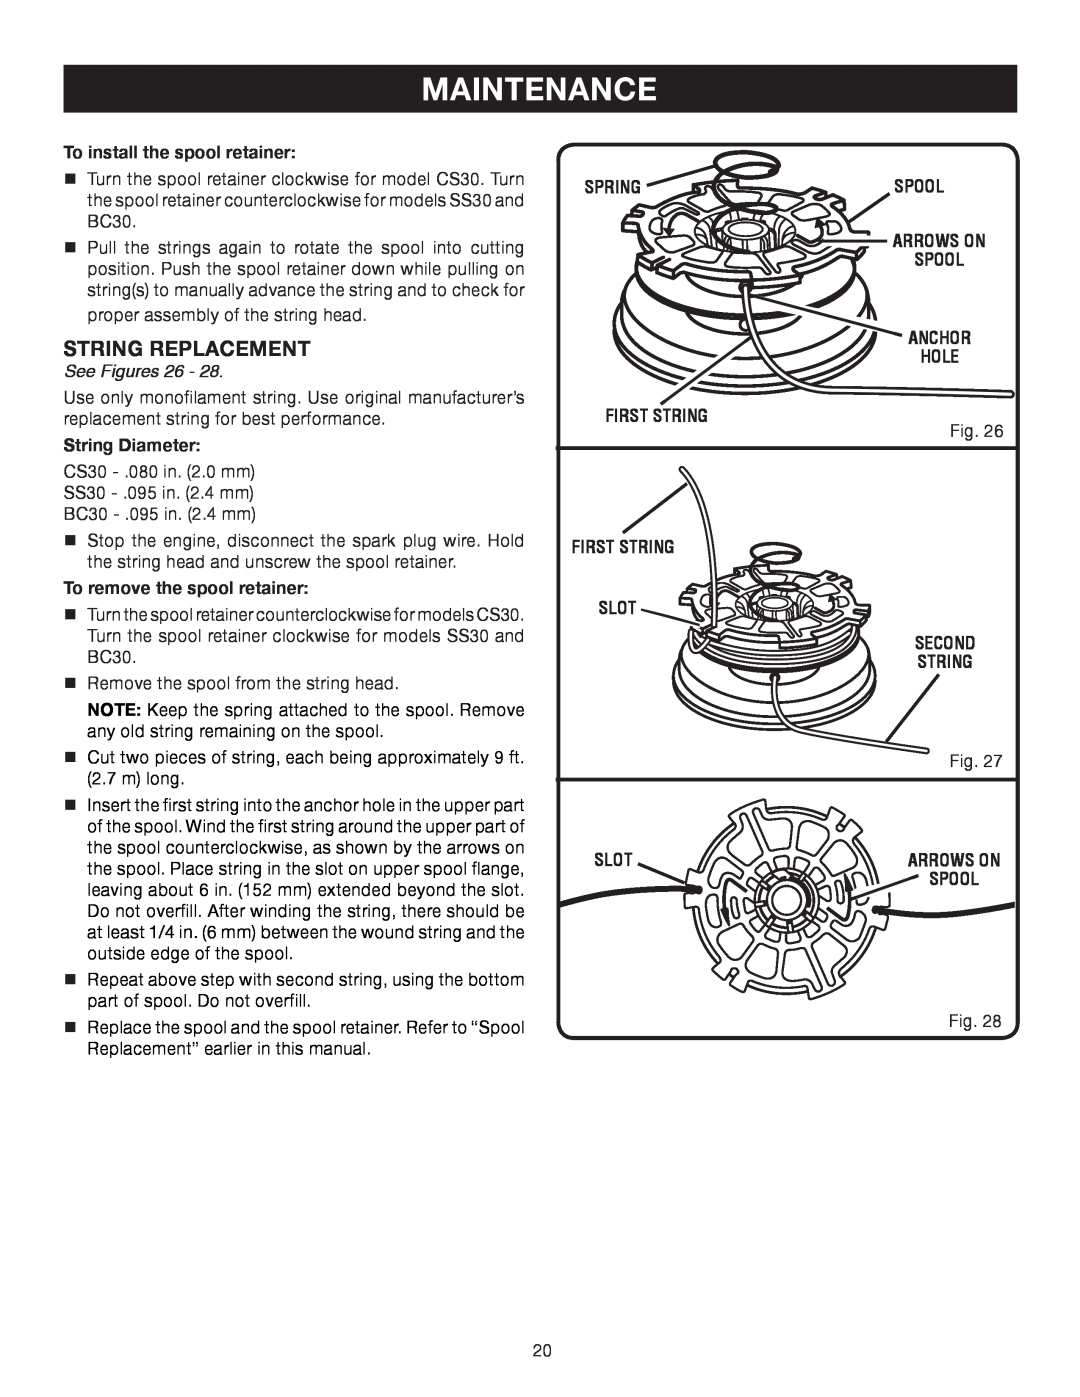 Ryobi BC30 RY30260 String Replacement, Maintenance, To install the spool retainer, See Figures 26, Spring, String Diameter 